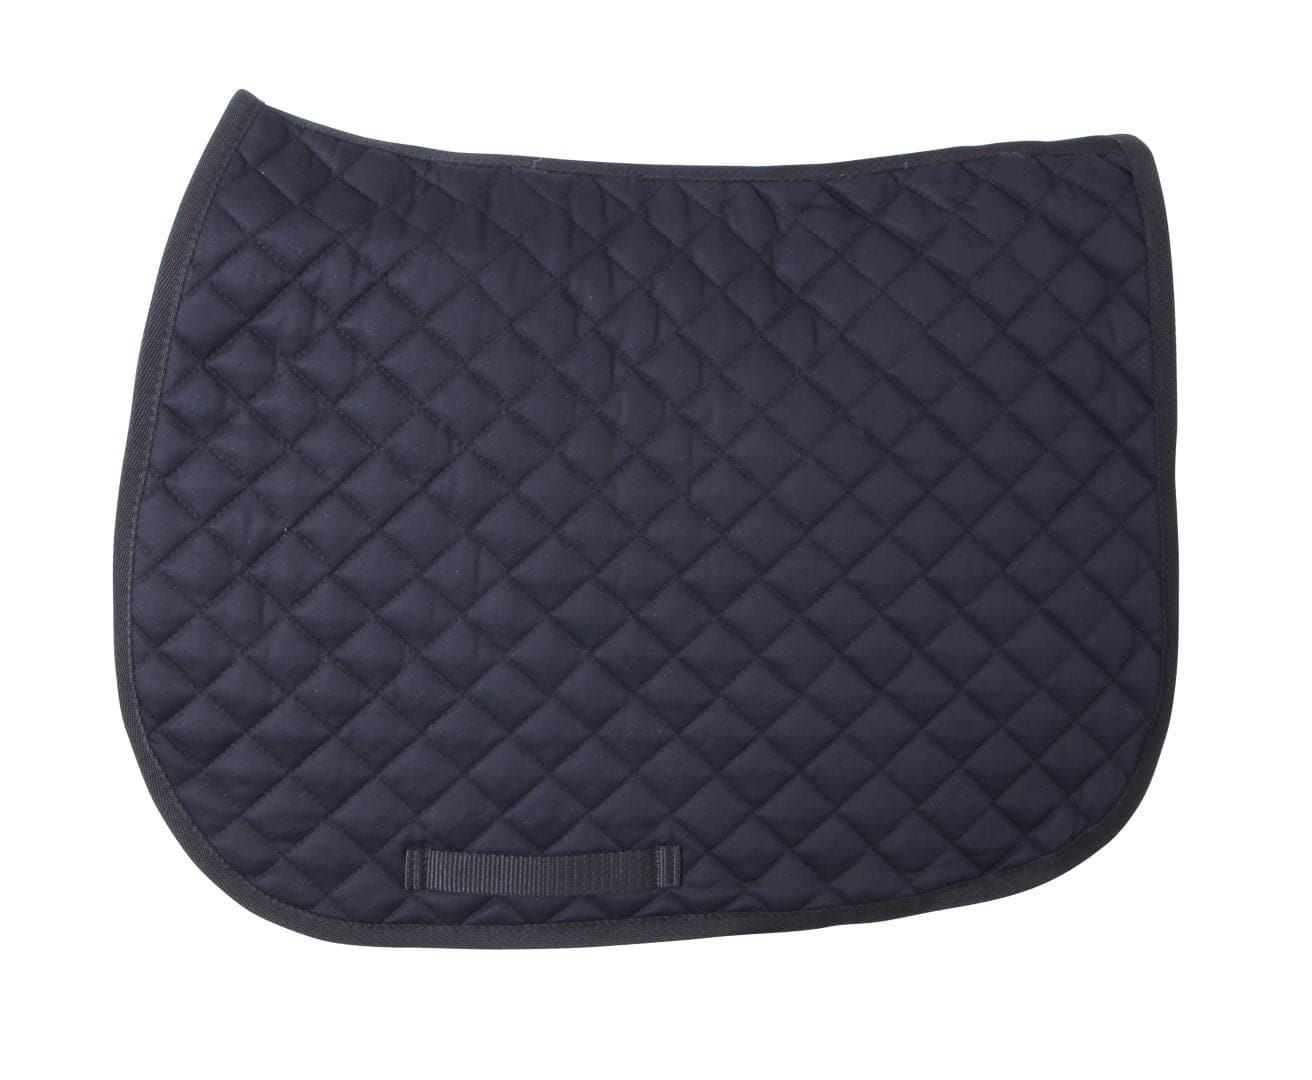 Flair Quilted Saddlecloth